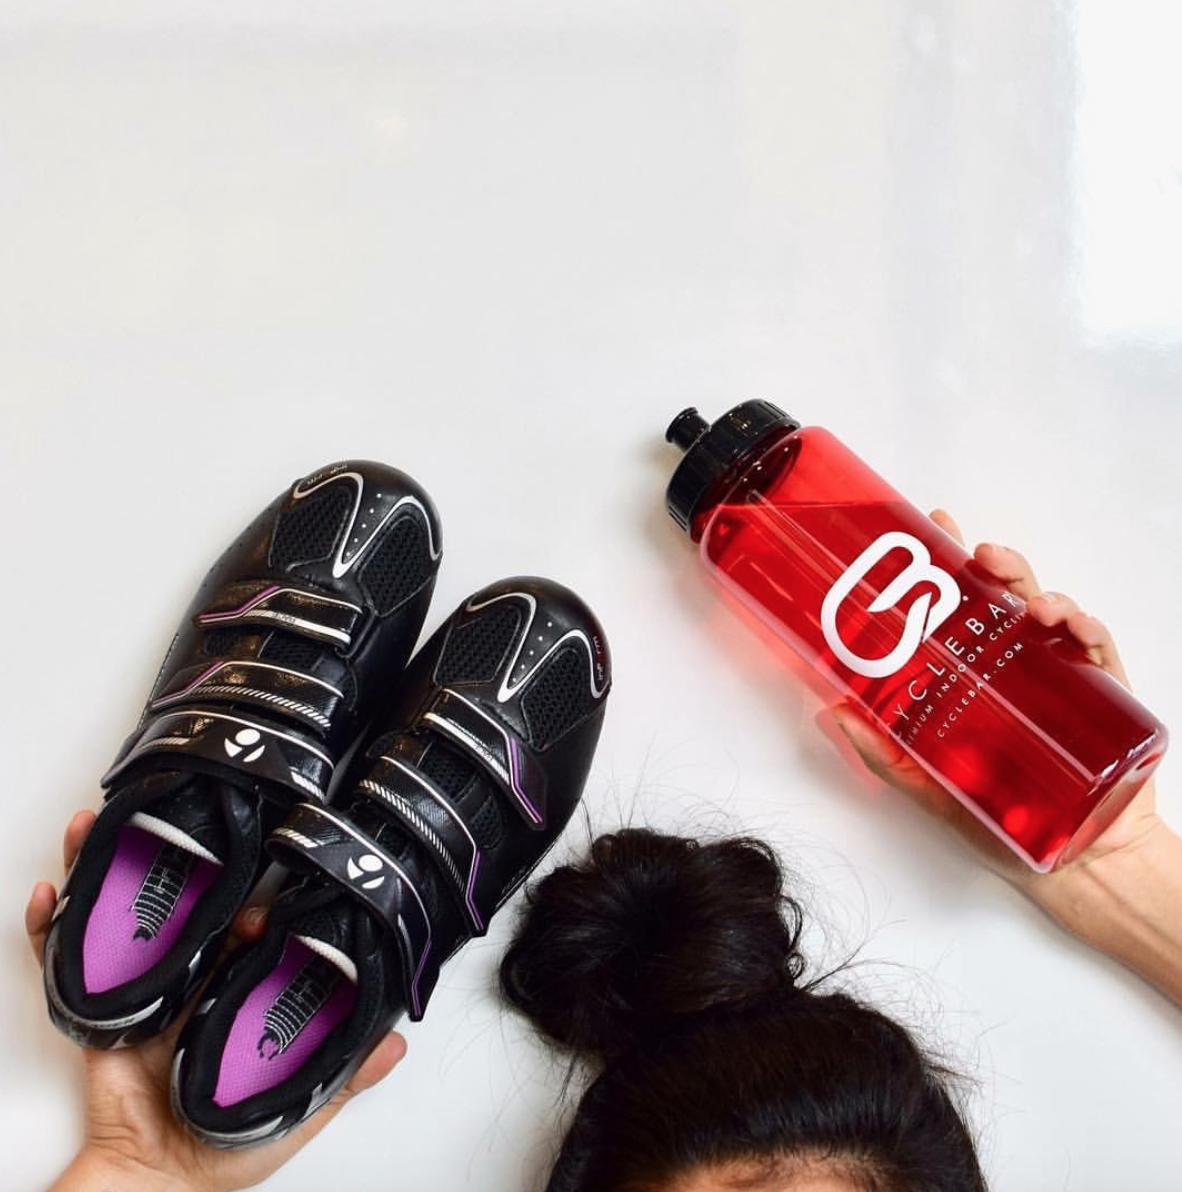 Cycling Shoes? CycleBar Reusable Water Bottle? A GREAT workout? All that and MORE is provided In Studio!